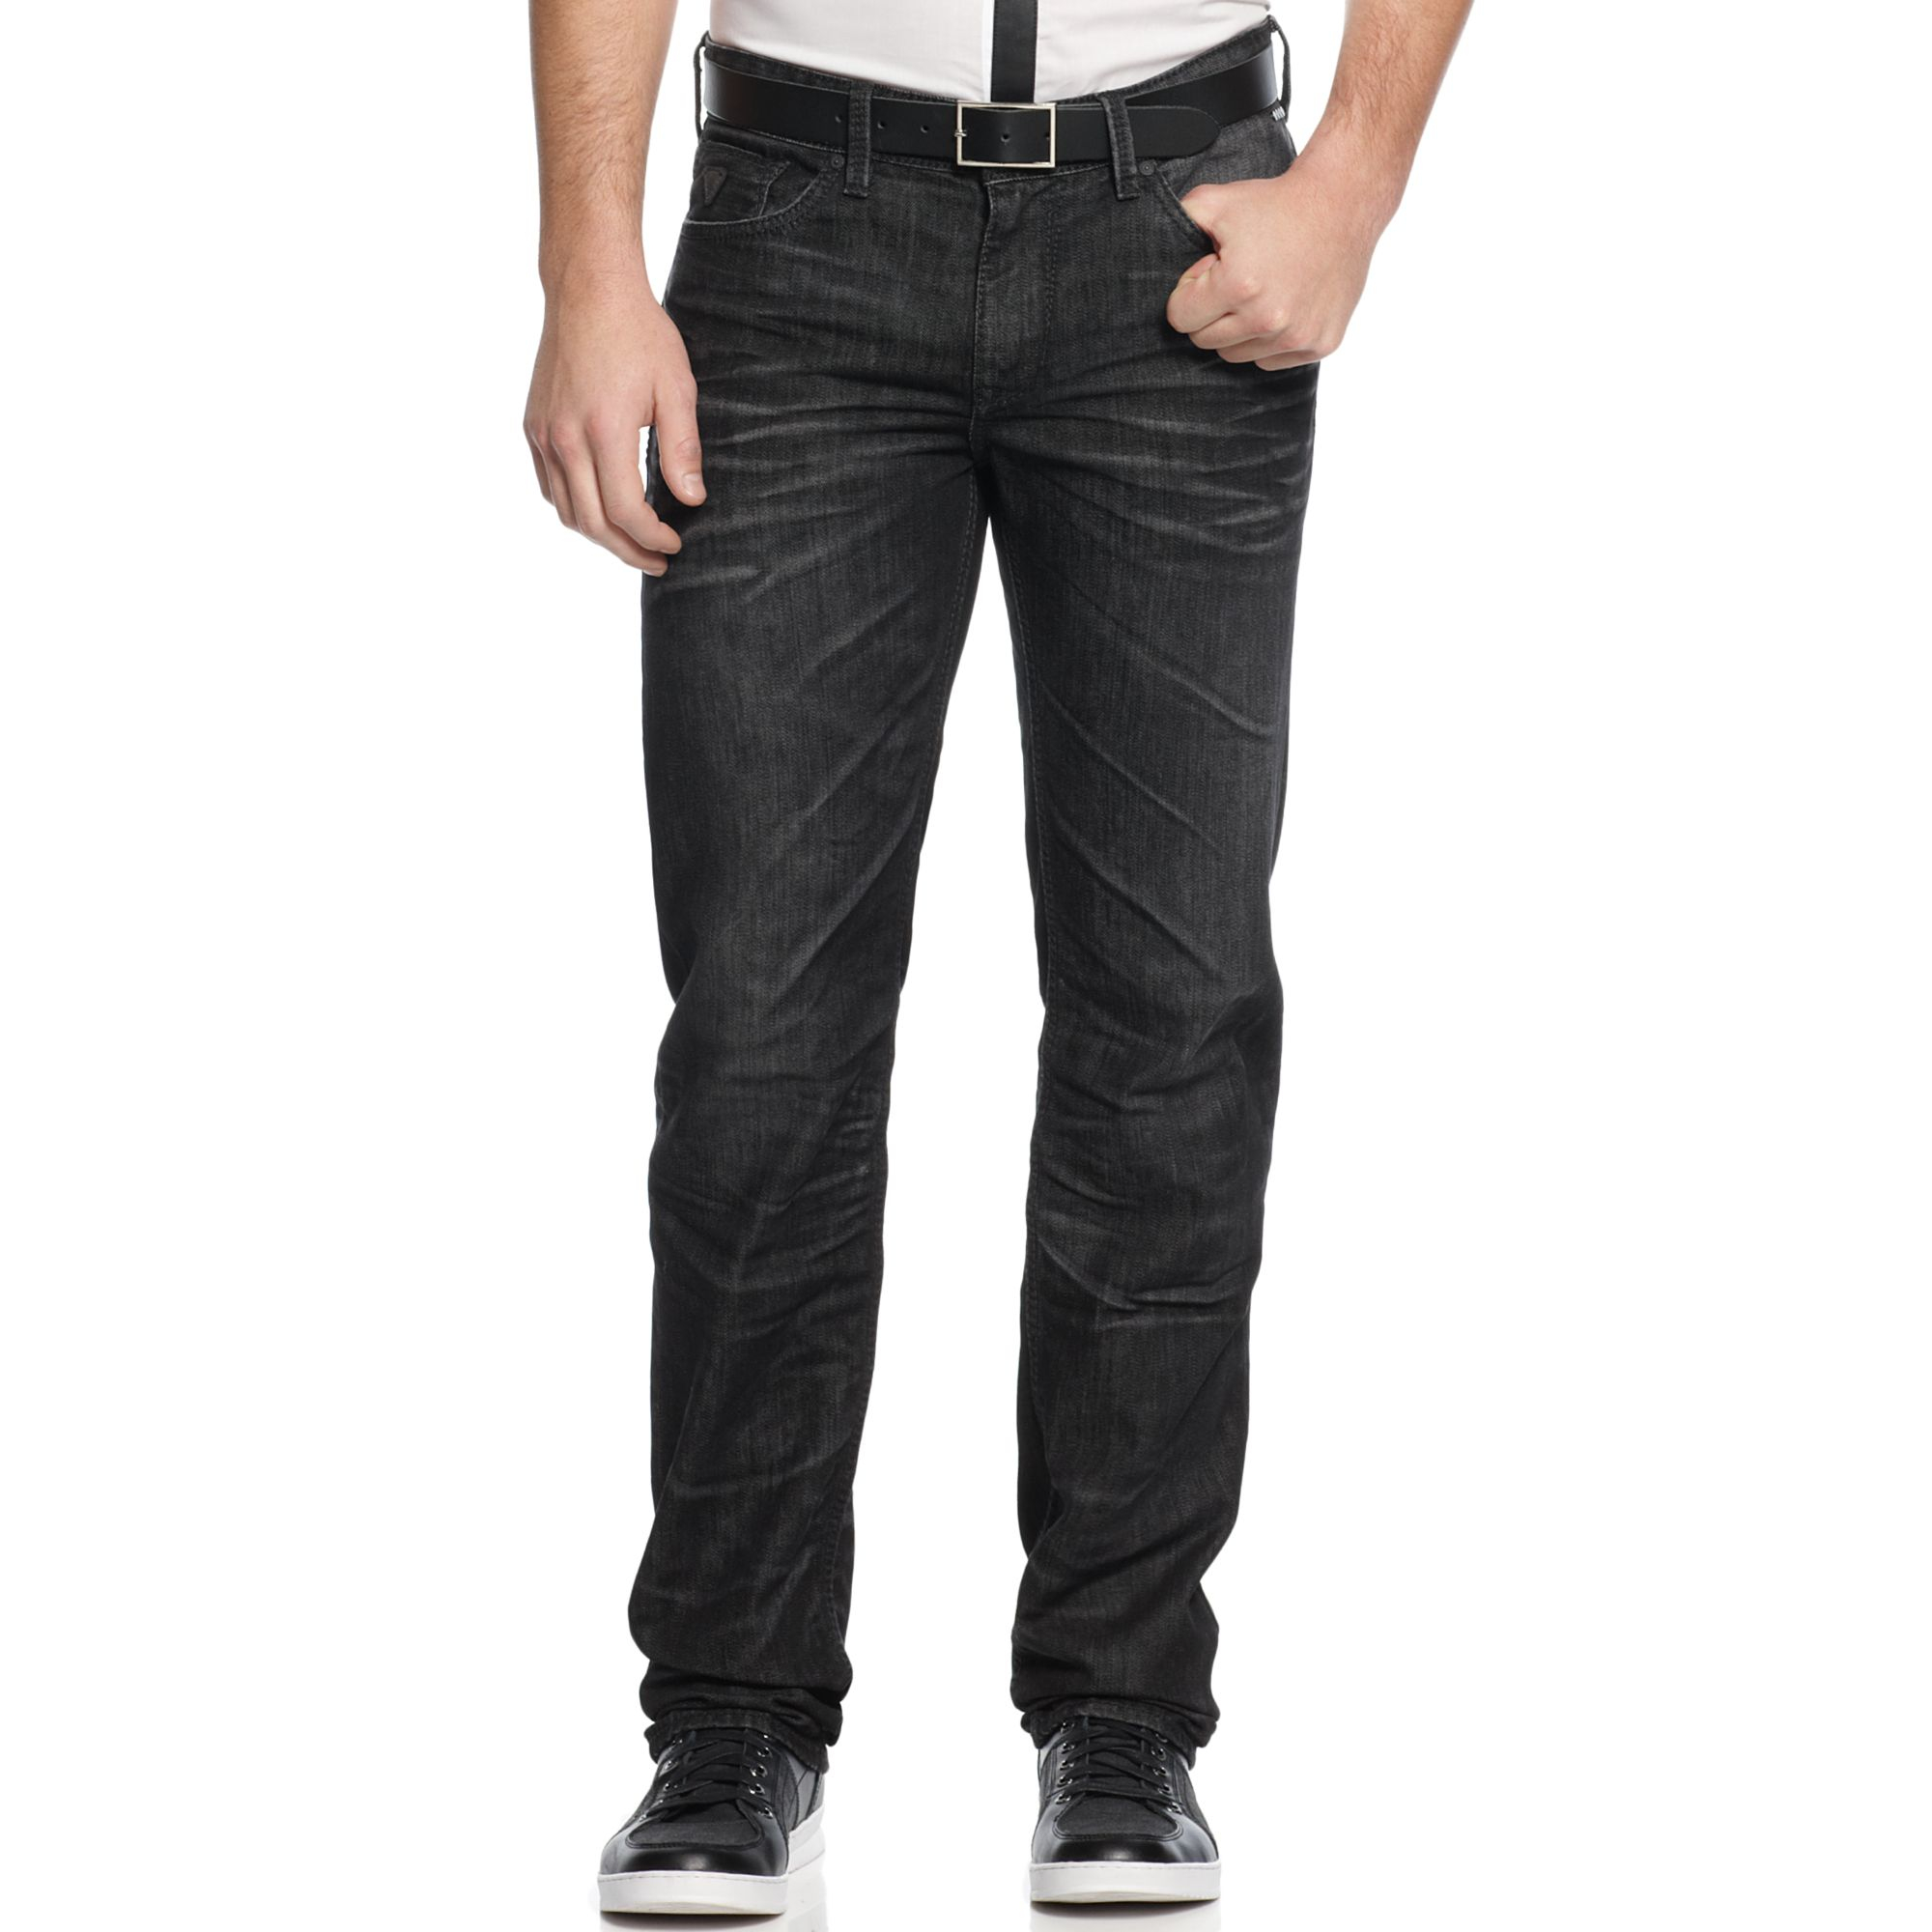 Guess Lincoln Slim Straight-fit Jeans in Black for Men - Lyst